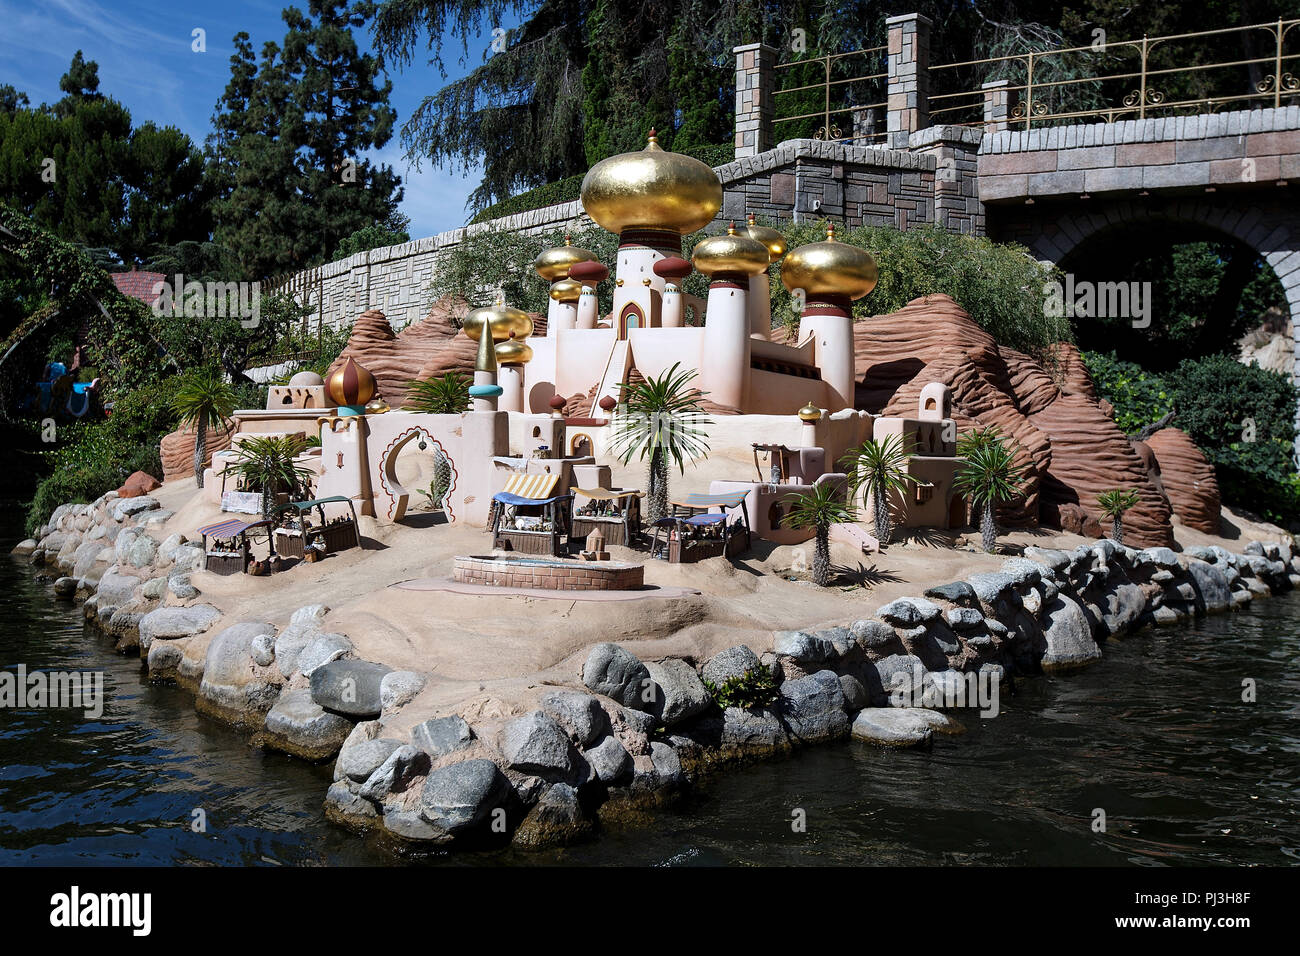 Sultan's palace from Aladdin display on the Storybook Land Canal Boats ride, Disneyland Park, Anaheim, California, United States of America Stock Photo